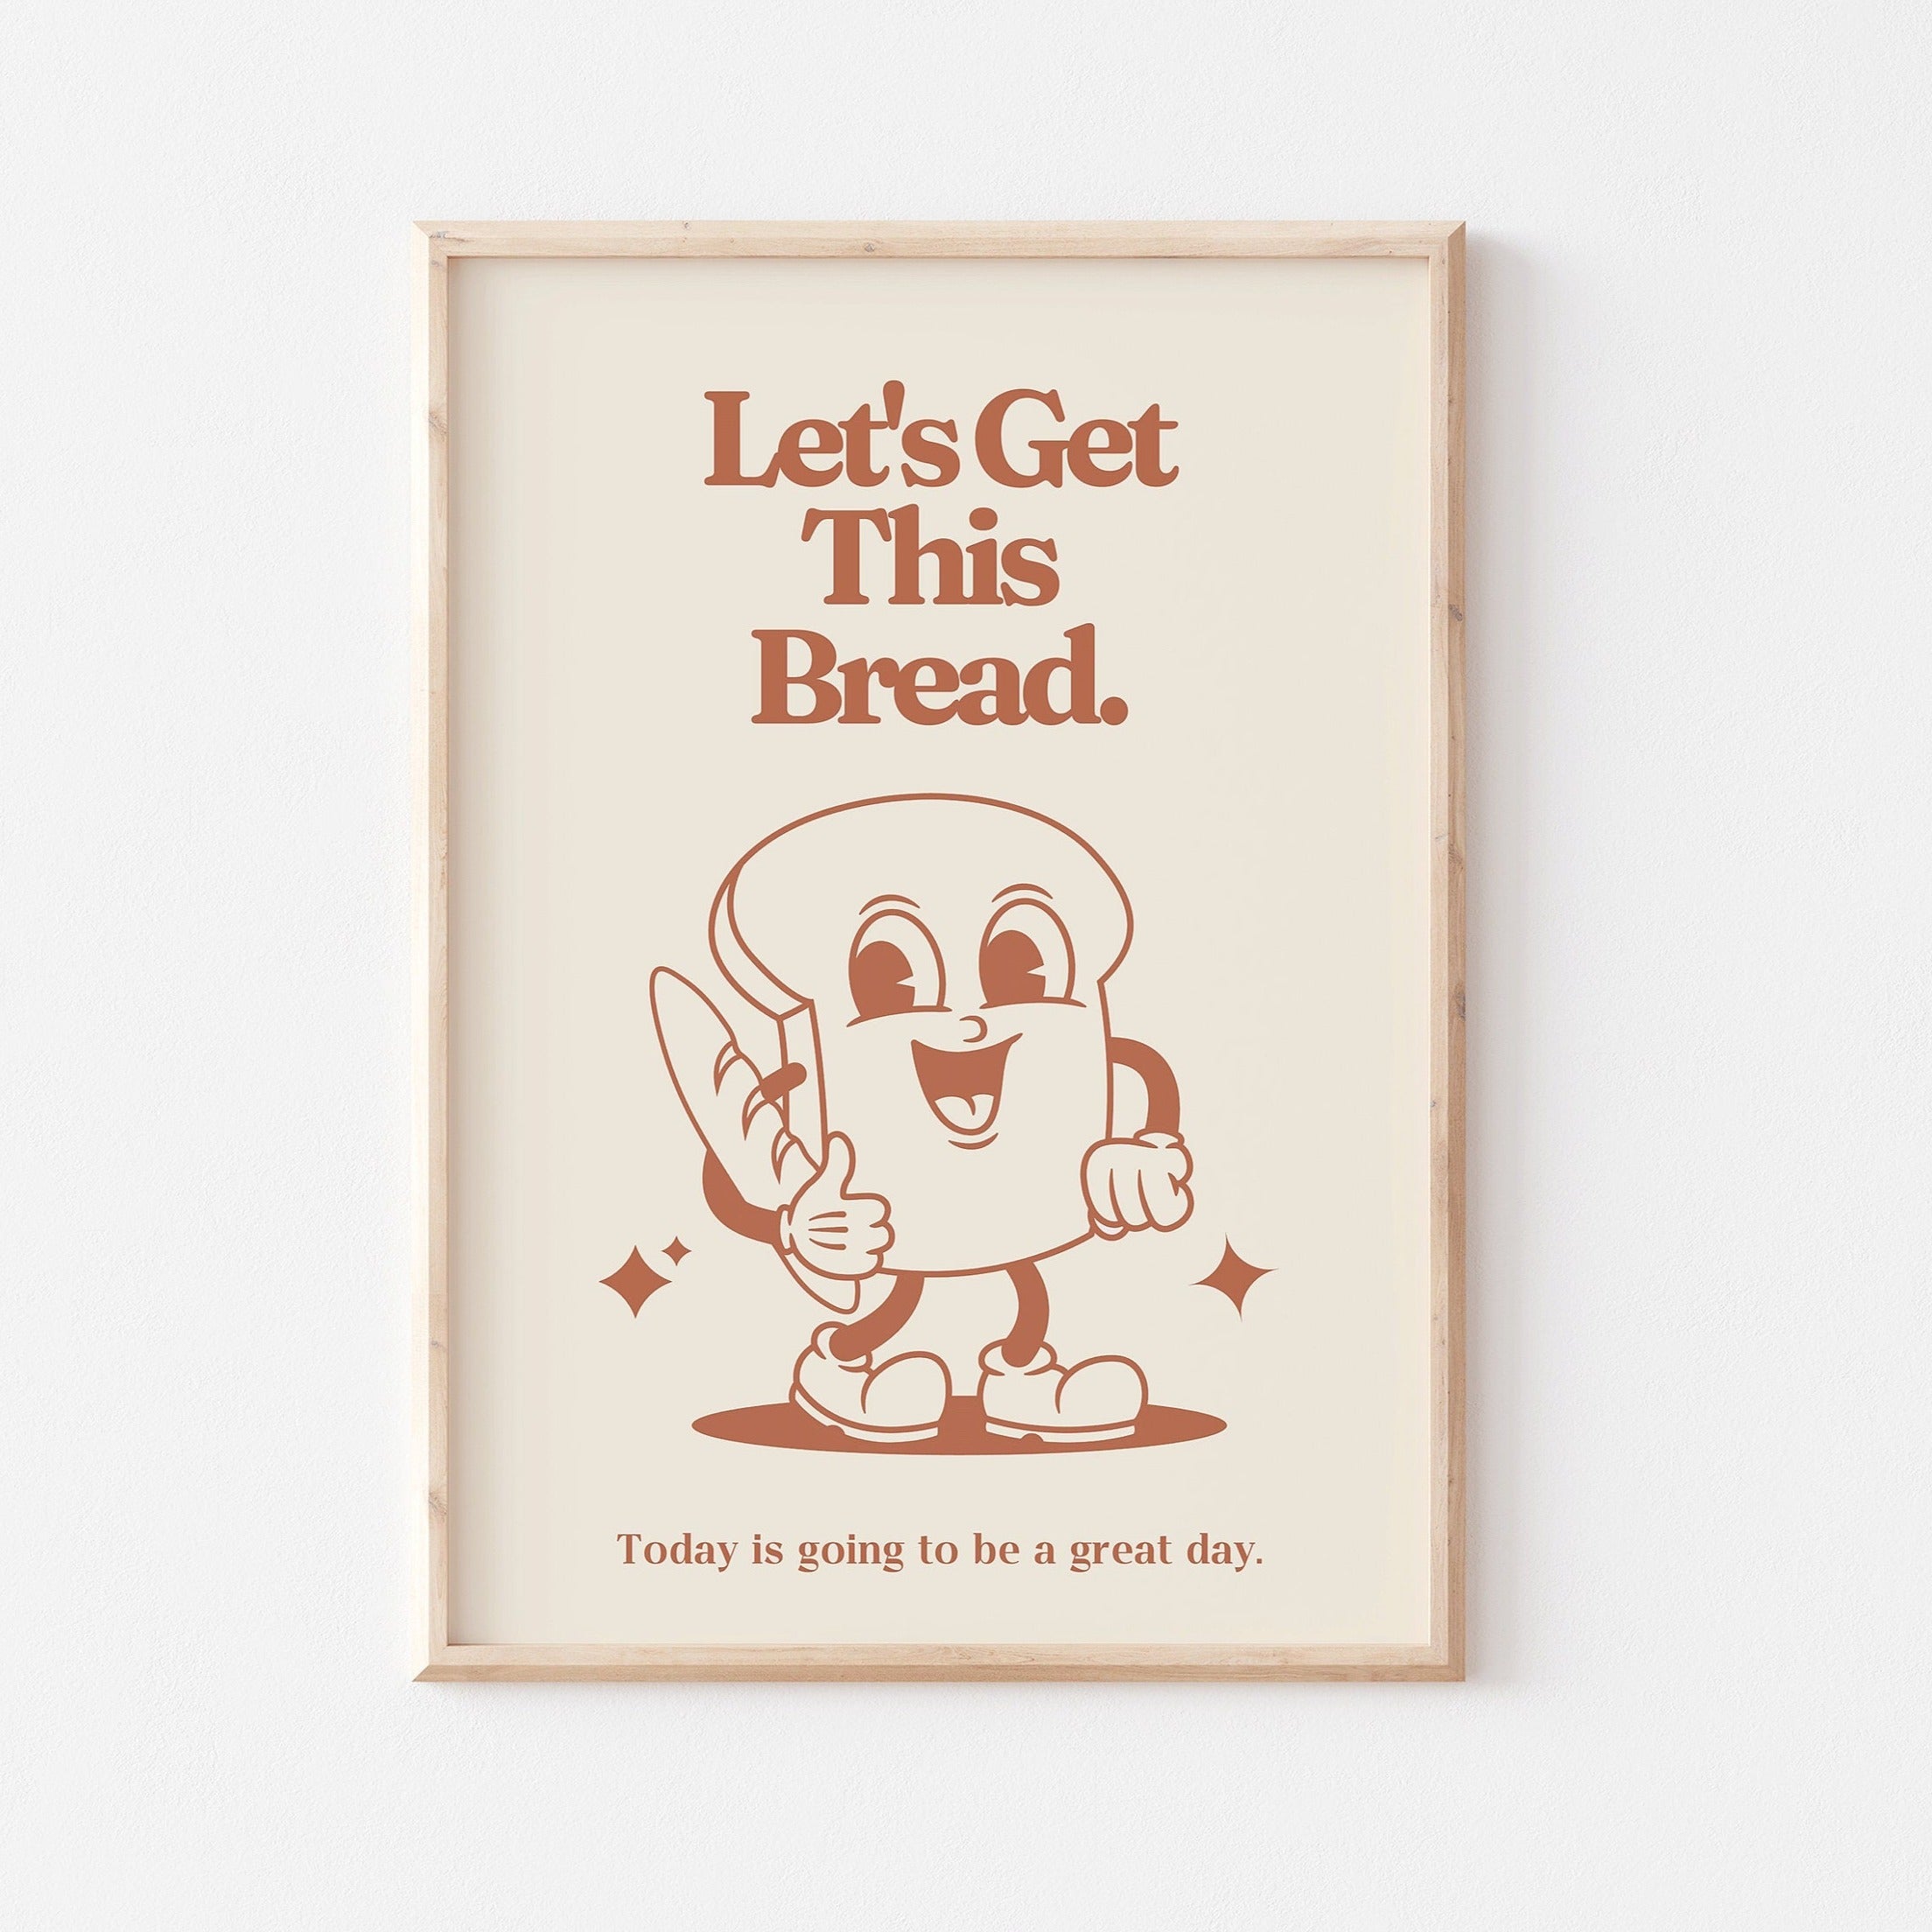 Retro Mascot Art PRINT, Let's Get This Bread, Motivational Kitchen Wall Art, Vintage Home Office Decor, Red and Beige Poster